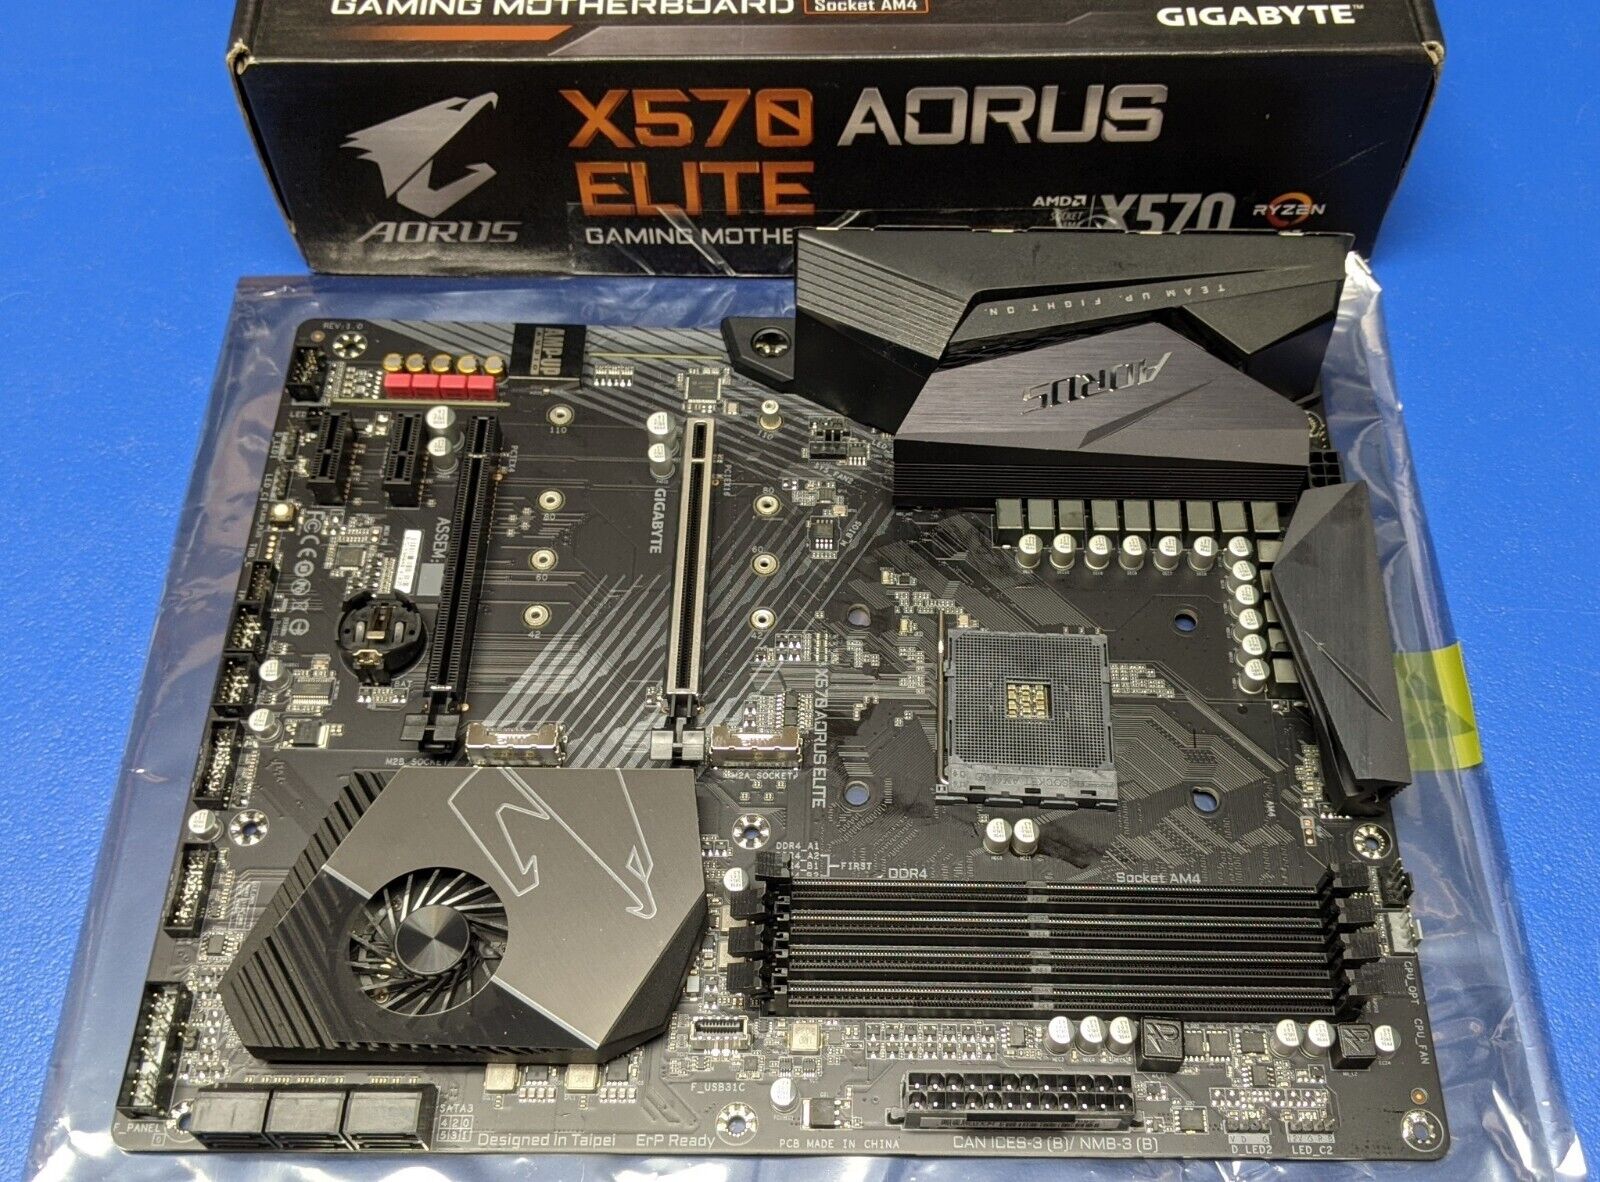 AS IS FOR PARTS - Gigabyte X570 AORUS Elite Gaming Motherboard for AMD Ryzen AM4